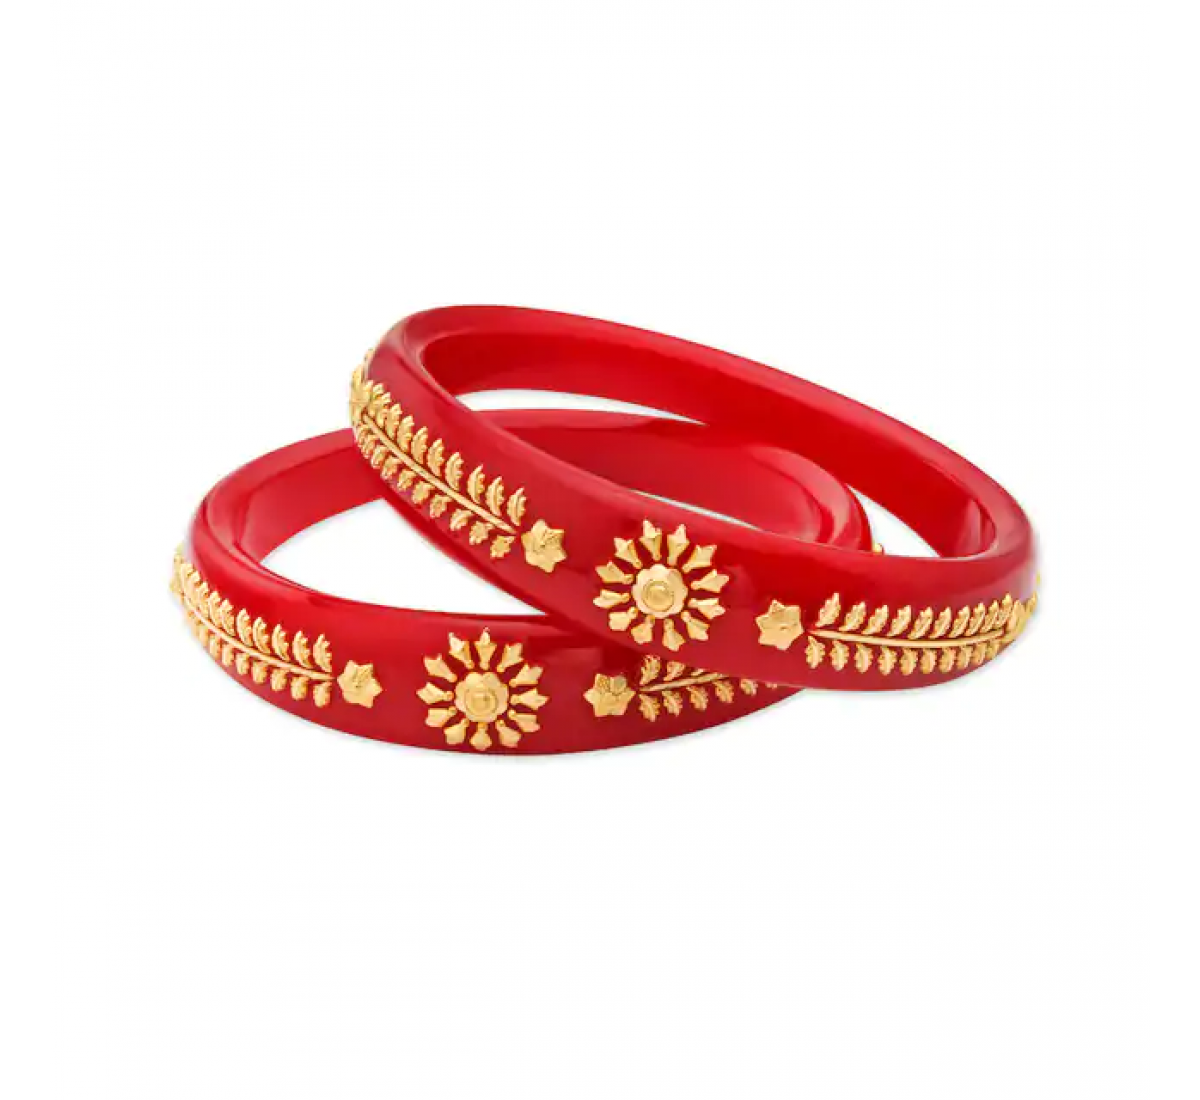 Handmade Pola Gold Plated Acrylic Bangle for Women, Red Pack of 2 - Etsy